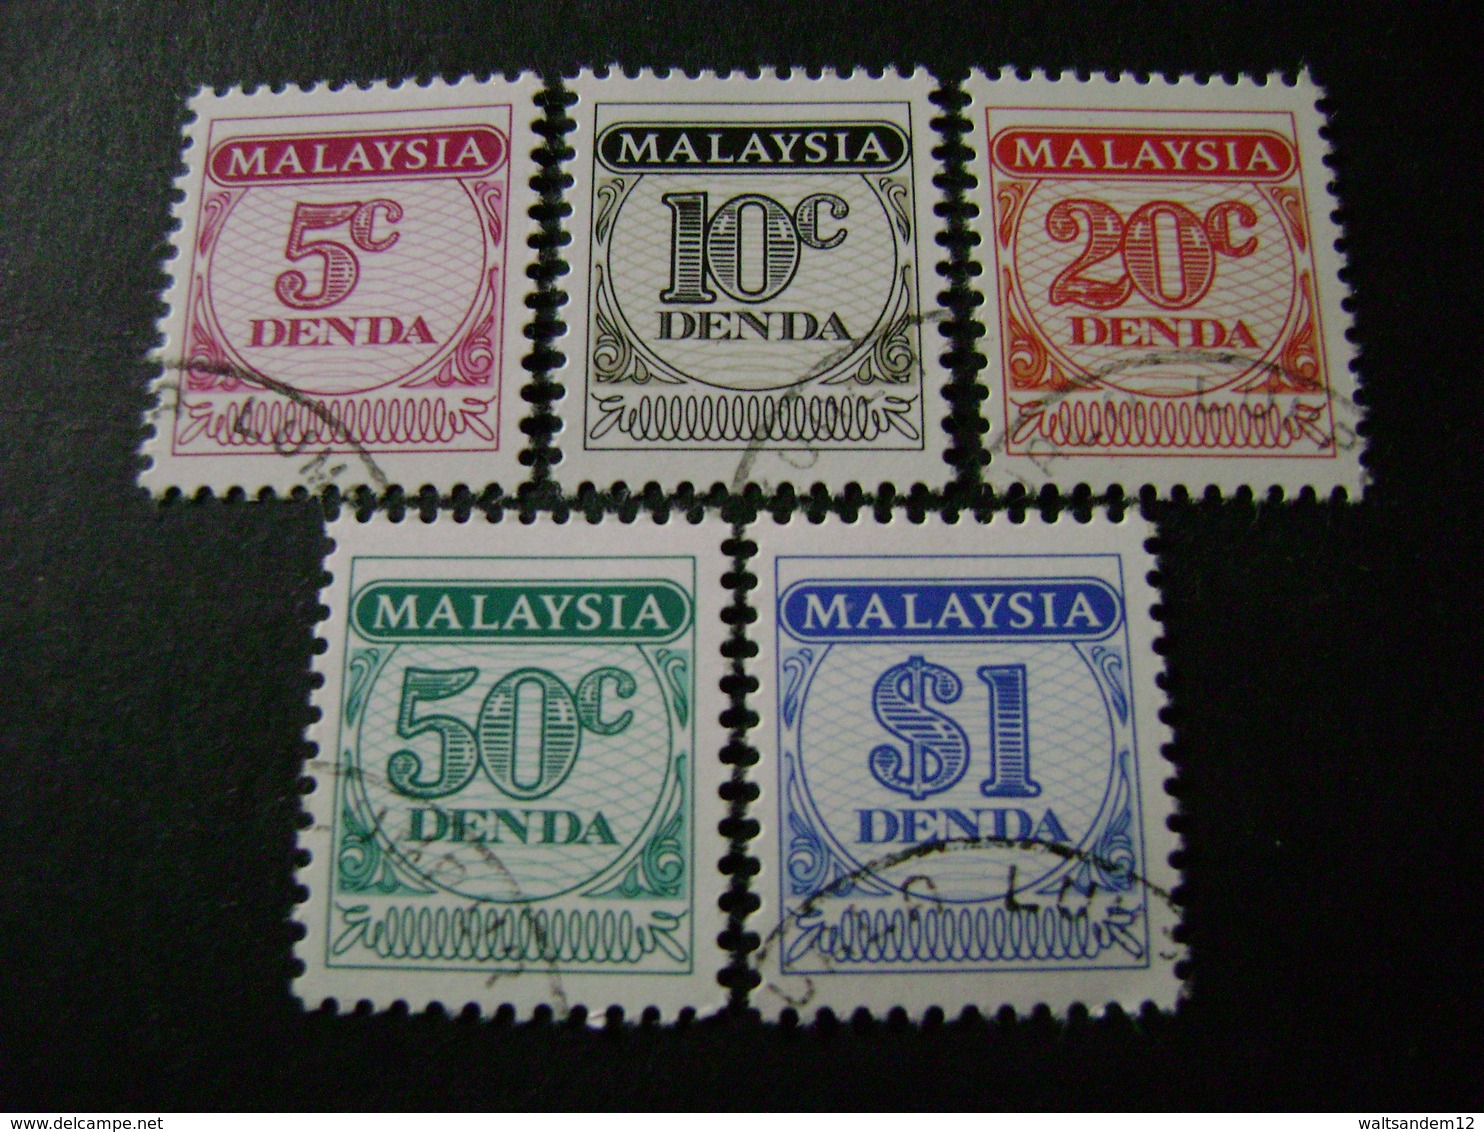 Malaysia 1986 Postage Dues (SG D22-D26) - Used - Malaysia (1964-...)